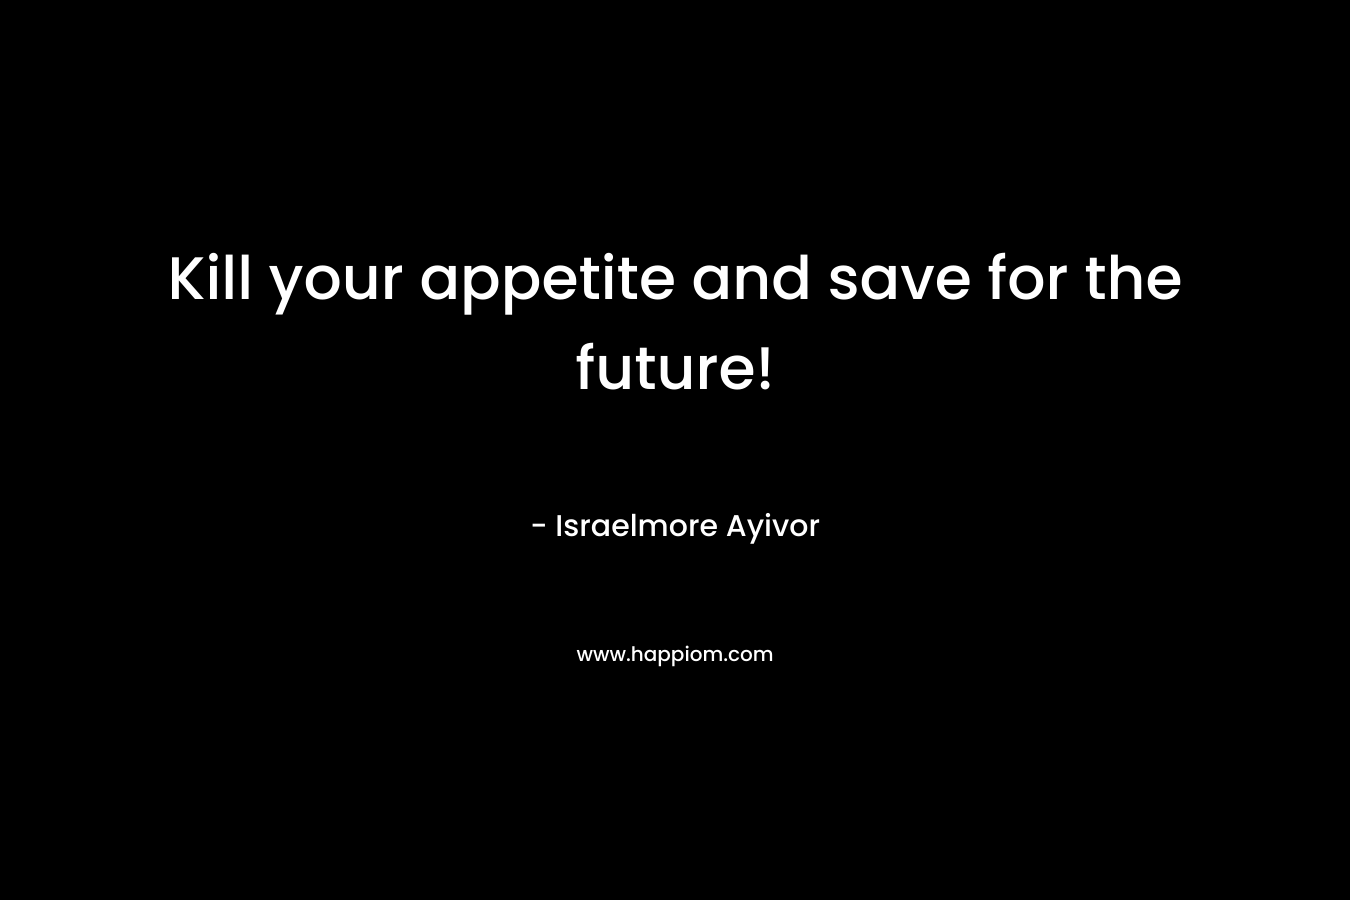 Kill your appetite and save for the future!